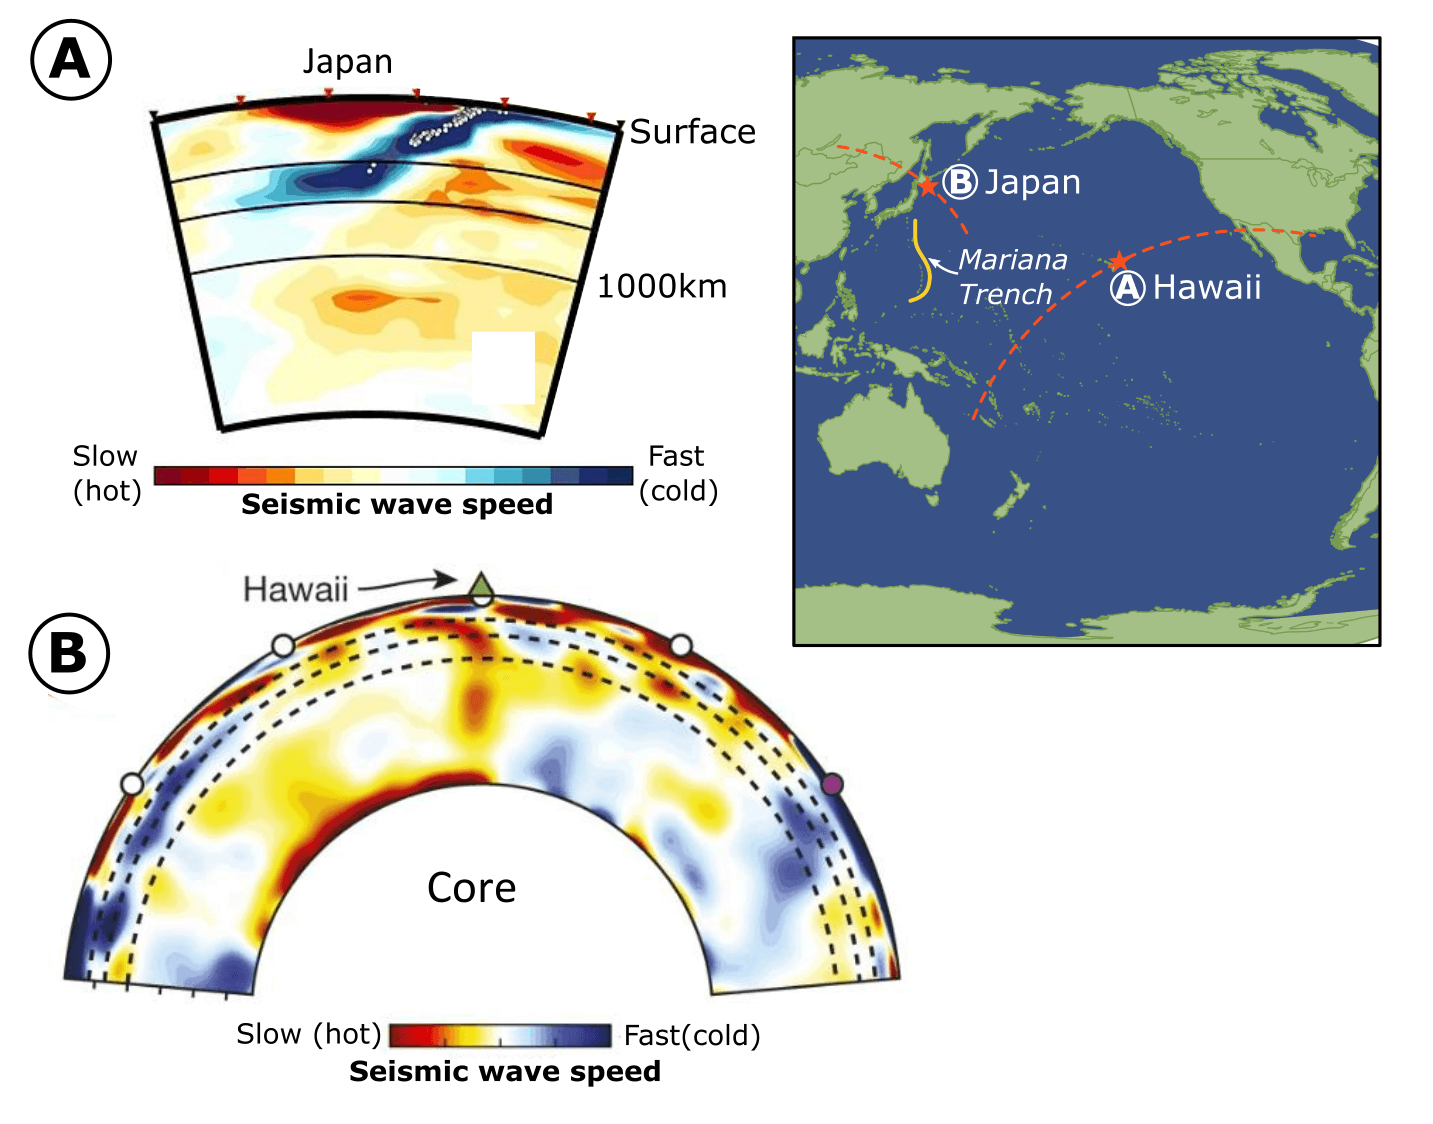 Image to show Tomographic 2D slices through the Earth